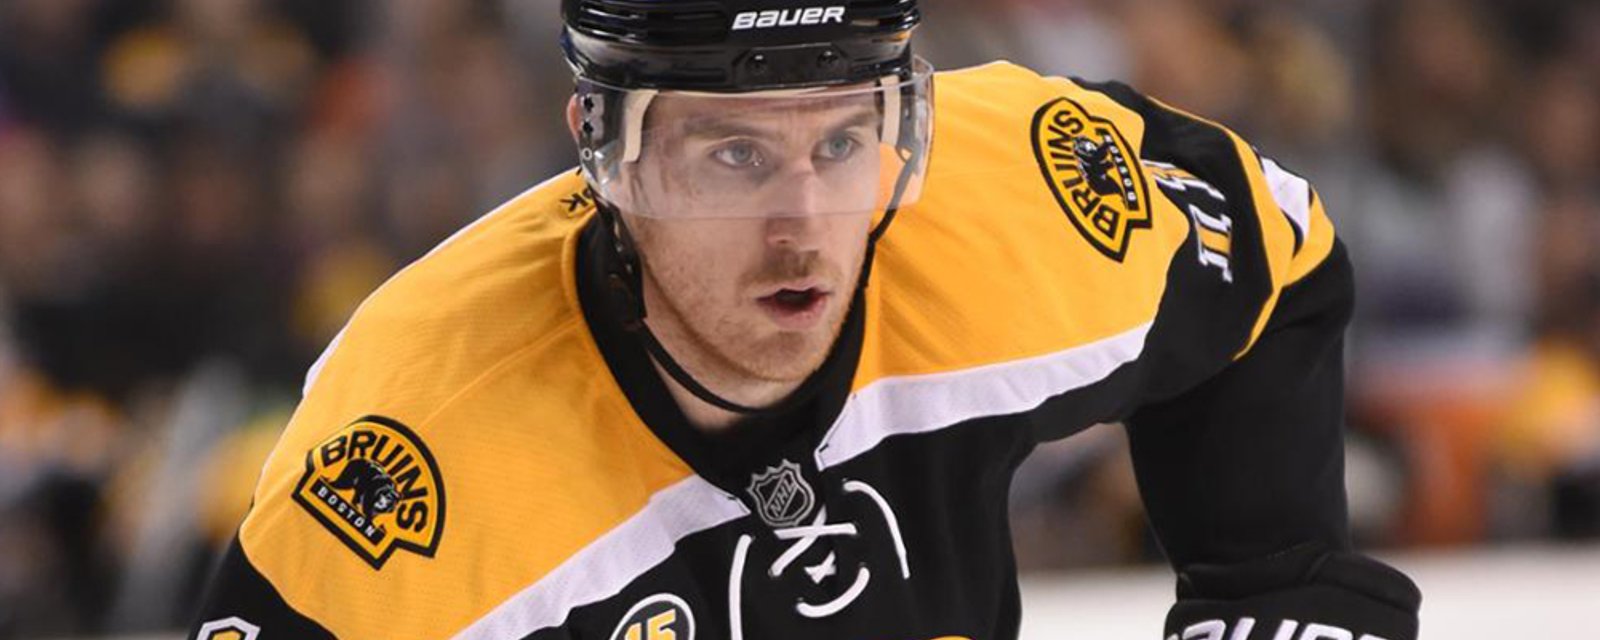 Boston Bruins release several statements following tragic death of Jimmy Hayes 